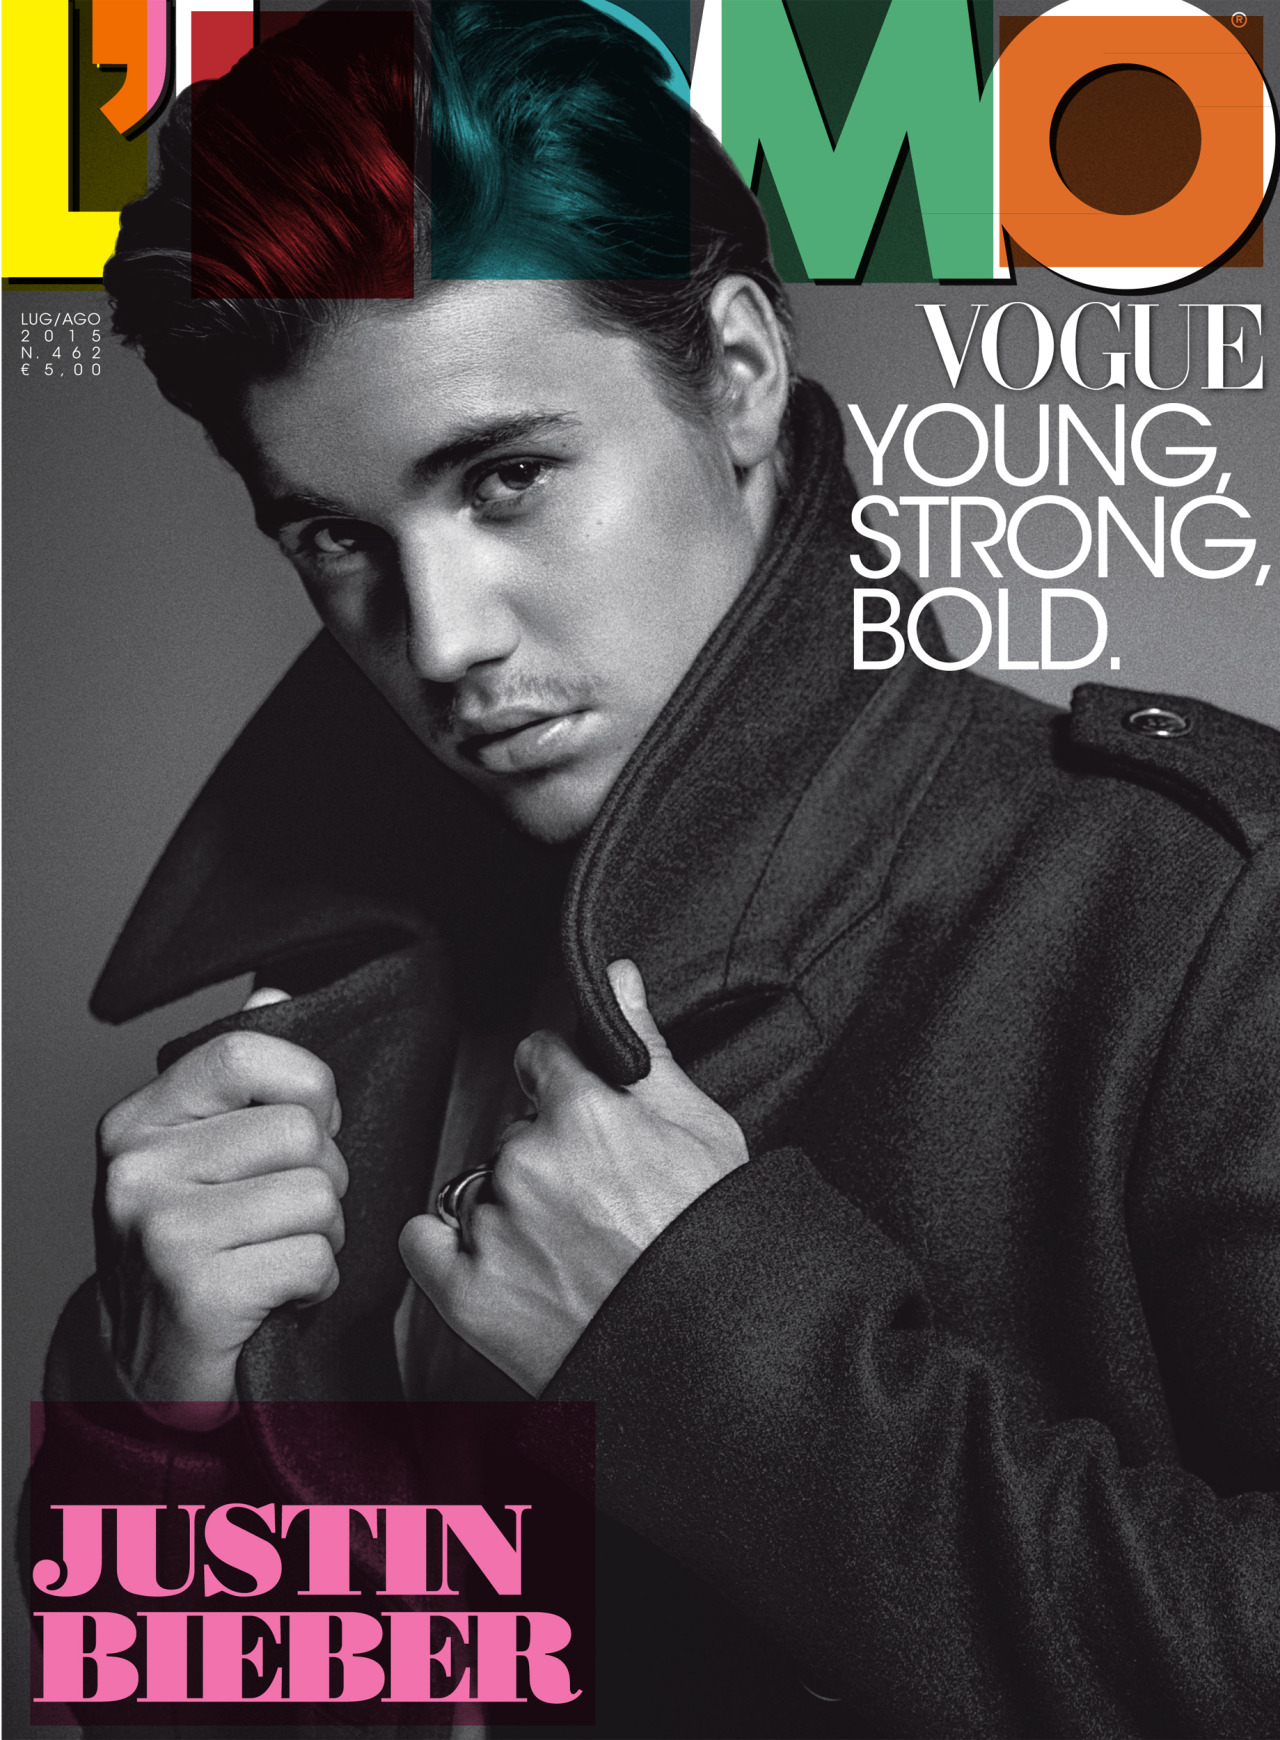 Justin Bieber Has Coat Moment for L'Uomo Vogue July/August 2015 Cover Shoot1280 x 1740